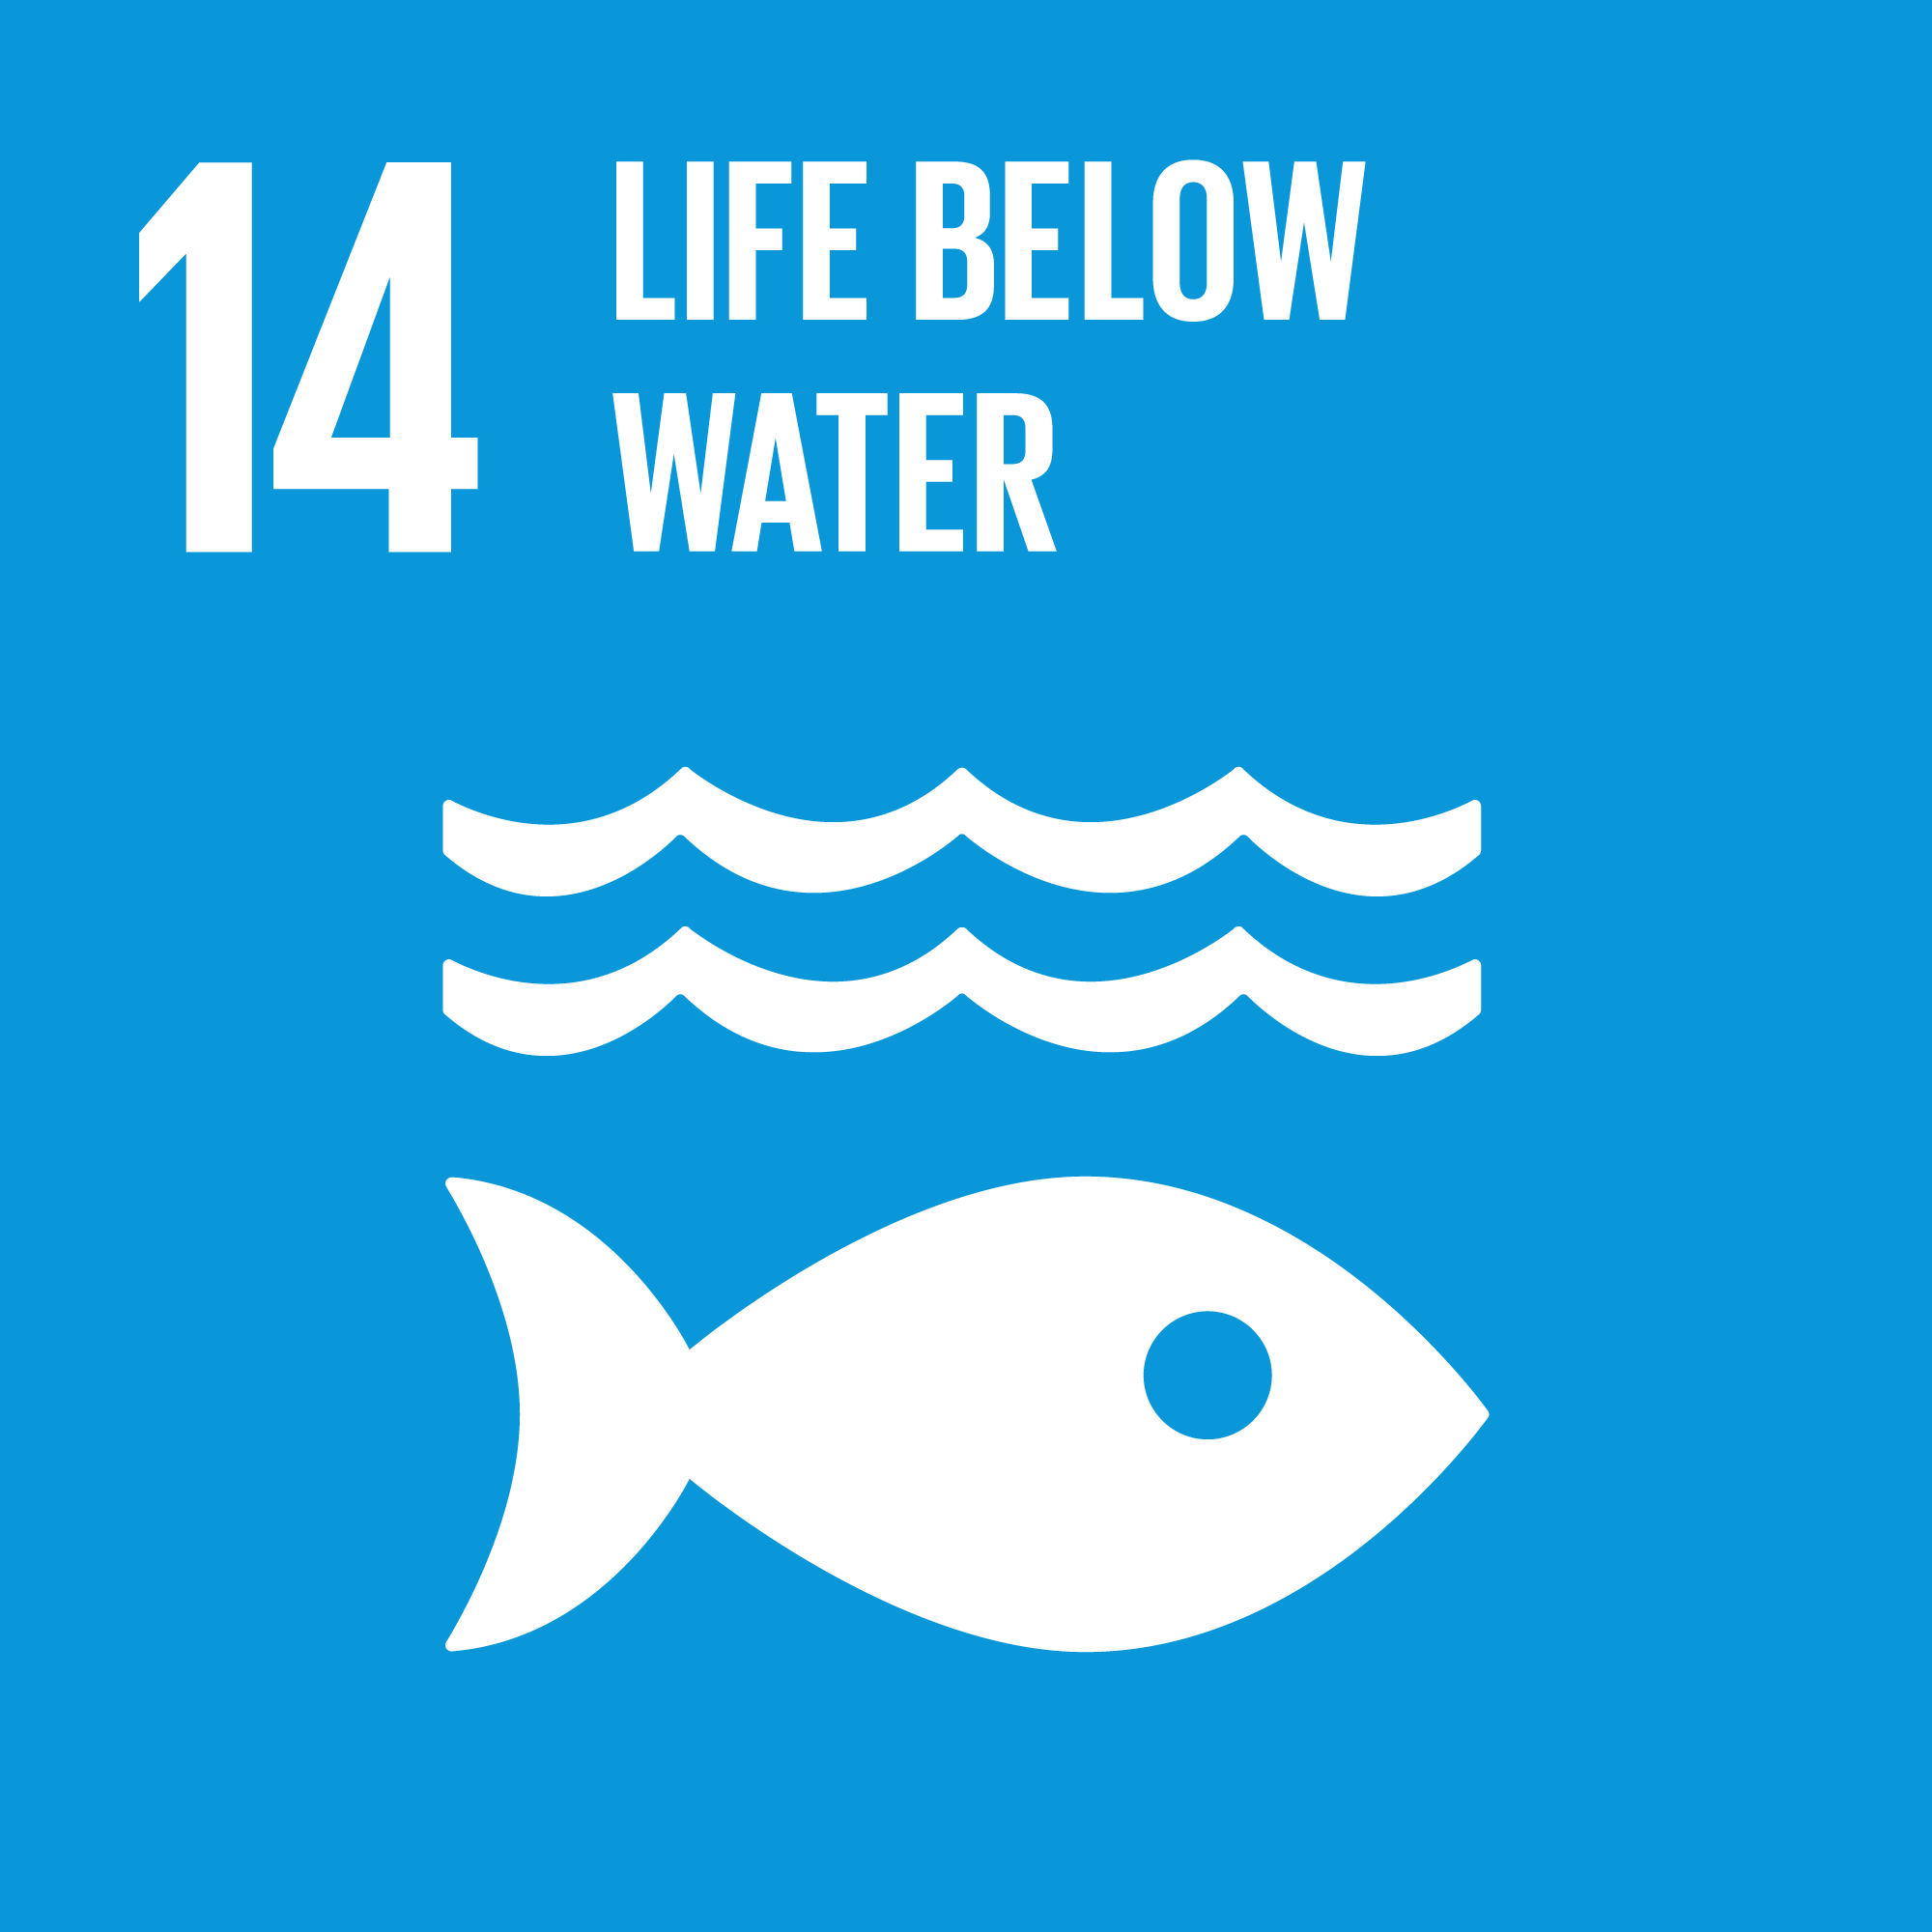  Goal 14: Life Below Water - Conserve and sustainably use the oceans, seas and marine resources for sustainable development